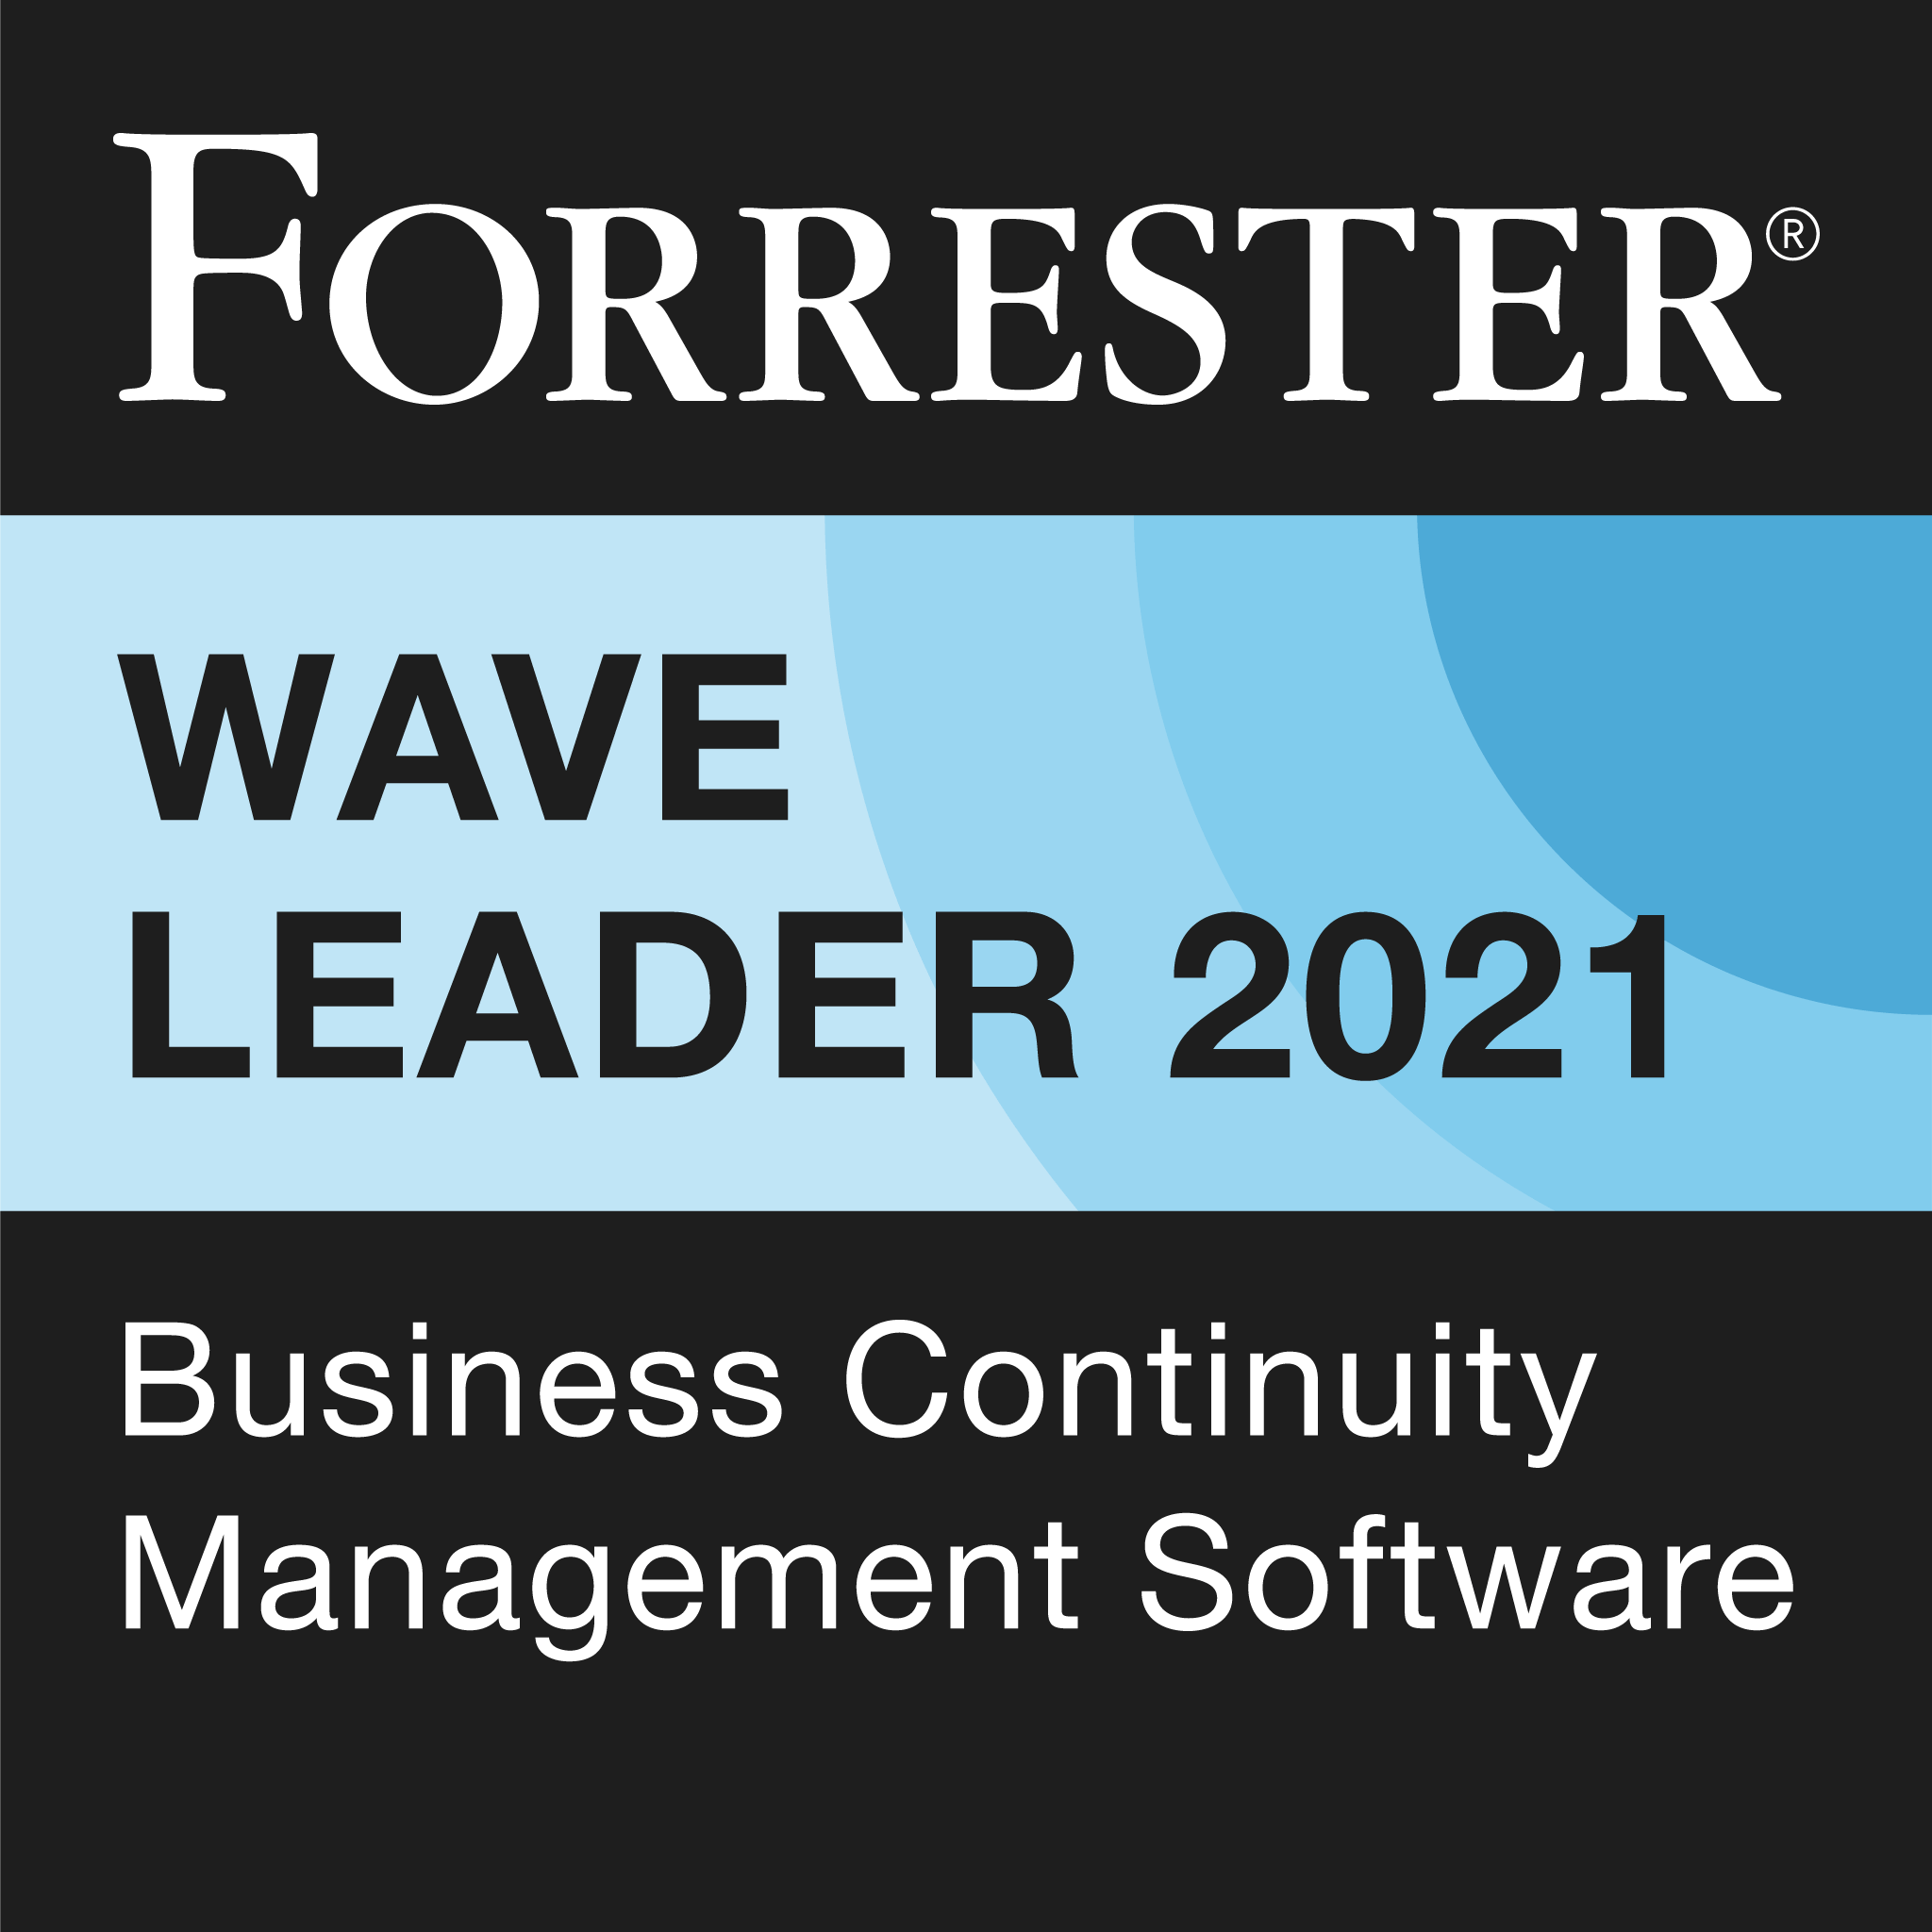 Fusion Risk Management Recognized as a Leader in The Forrester Wave™ for Business Continuity Management Software